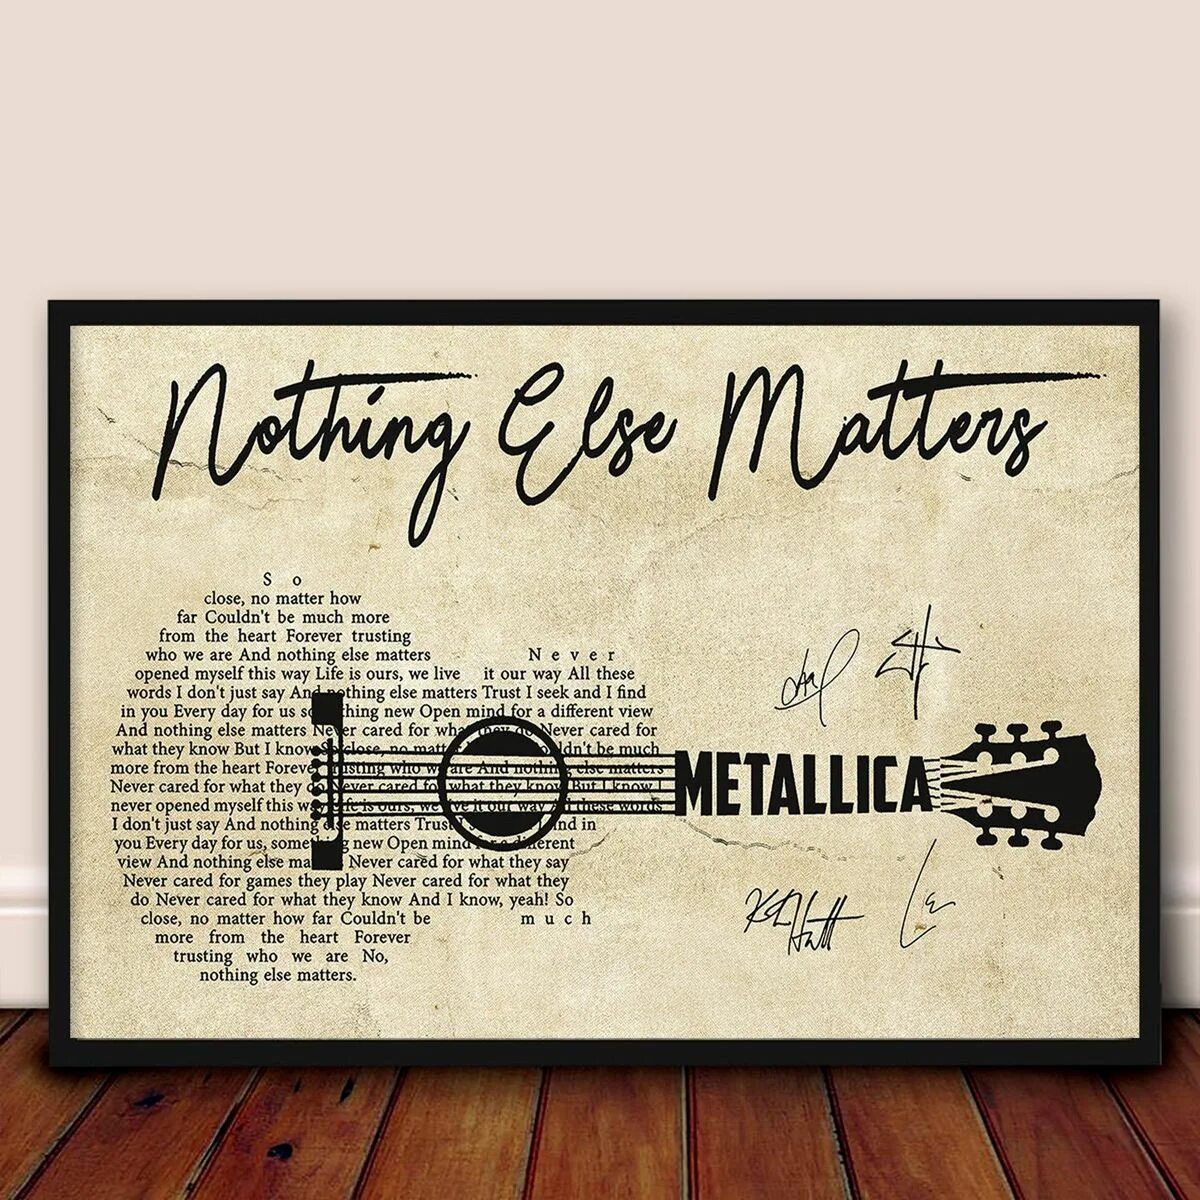 Nothing matters the last. Металлика nothing. Metallica nothing else matters текст. Текст металлика nothing else matters. Металлика nothing текст.